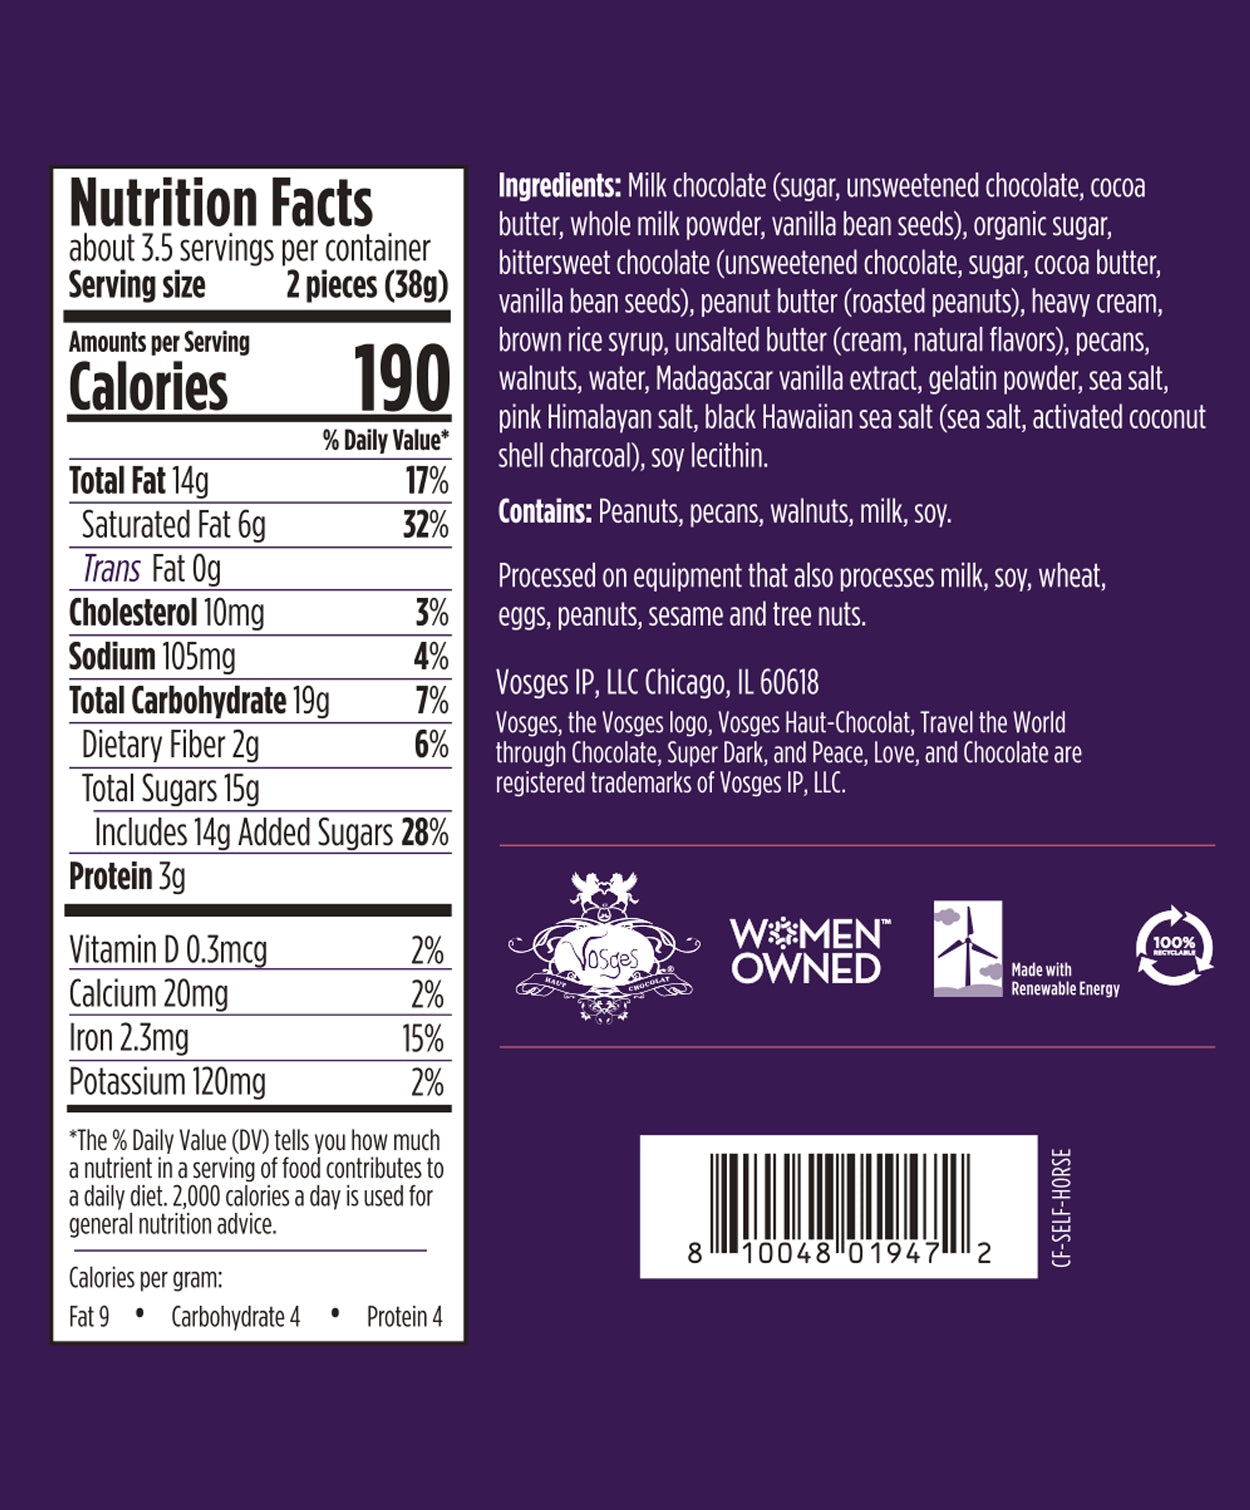 Nutrition Facts and Ingredients of Vosges Haut-Chocolat Self Love in white, san-serif font on a deep purple background.